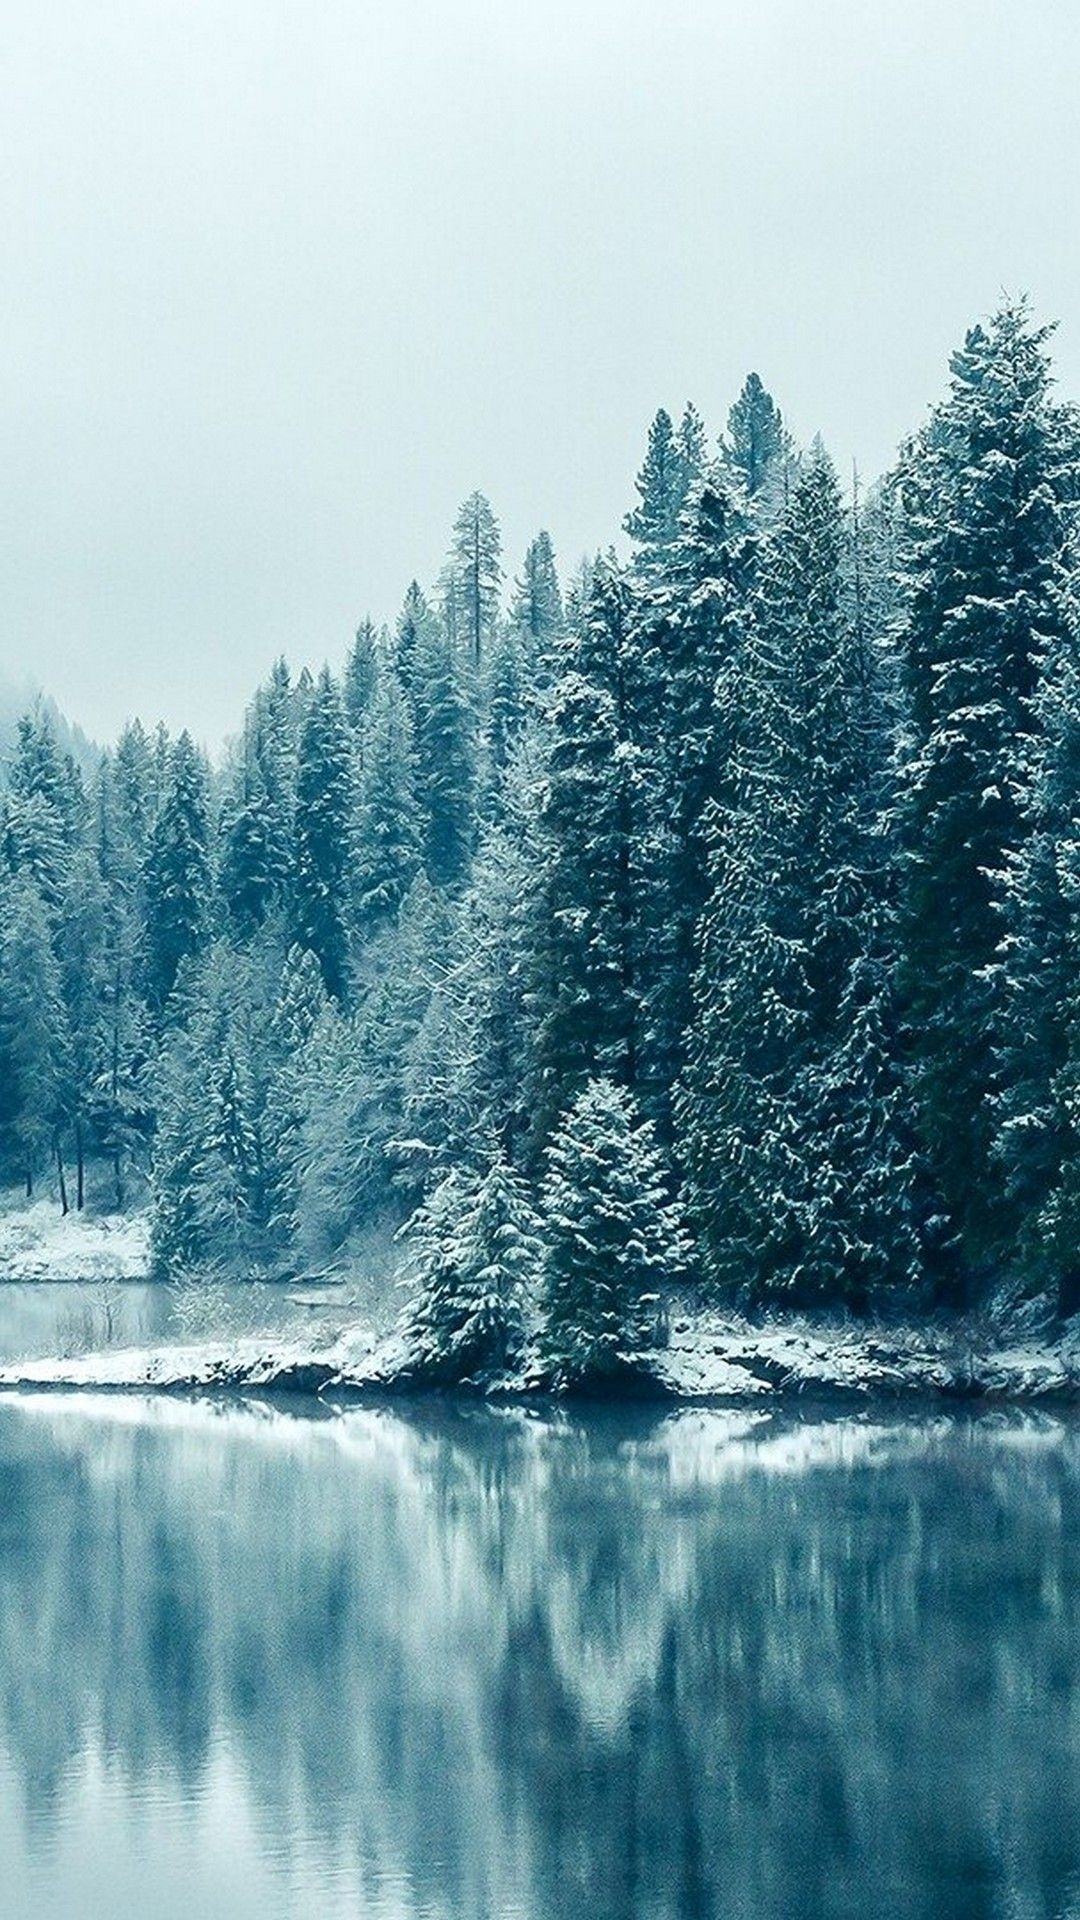 Snowy forest and lake wallpaper for your iPhone 6 Plus from Everpix - Winter